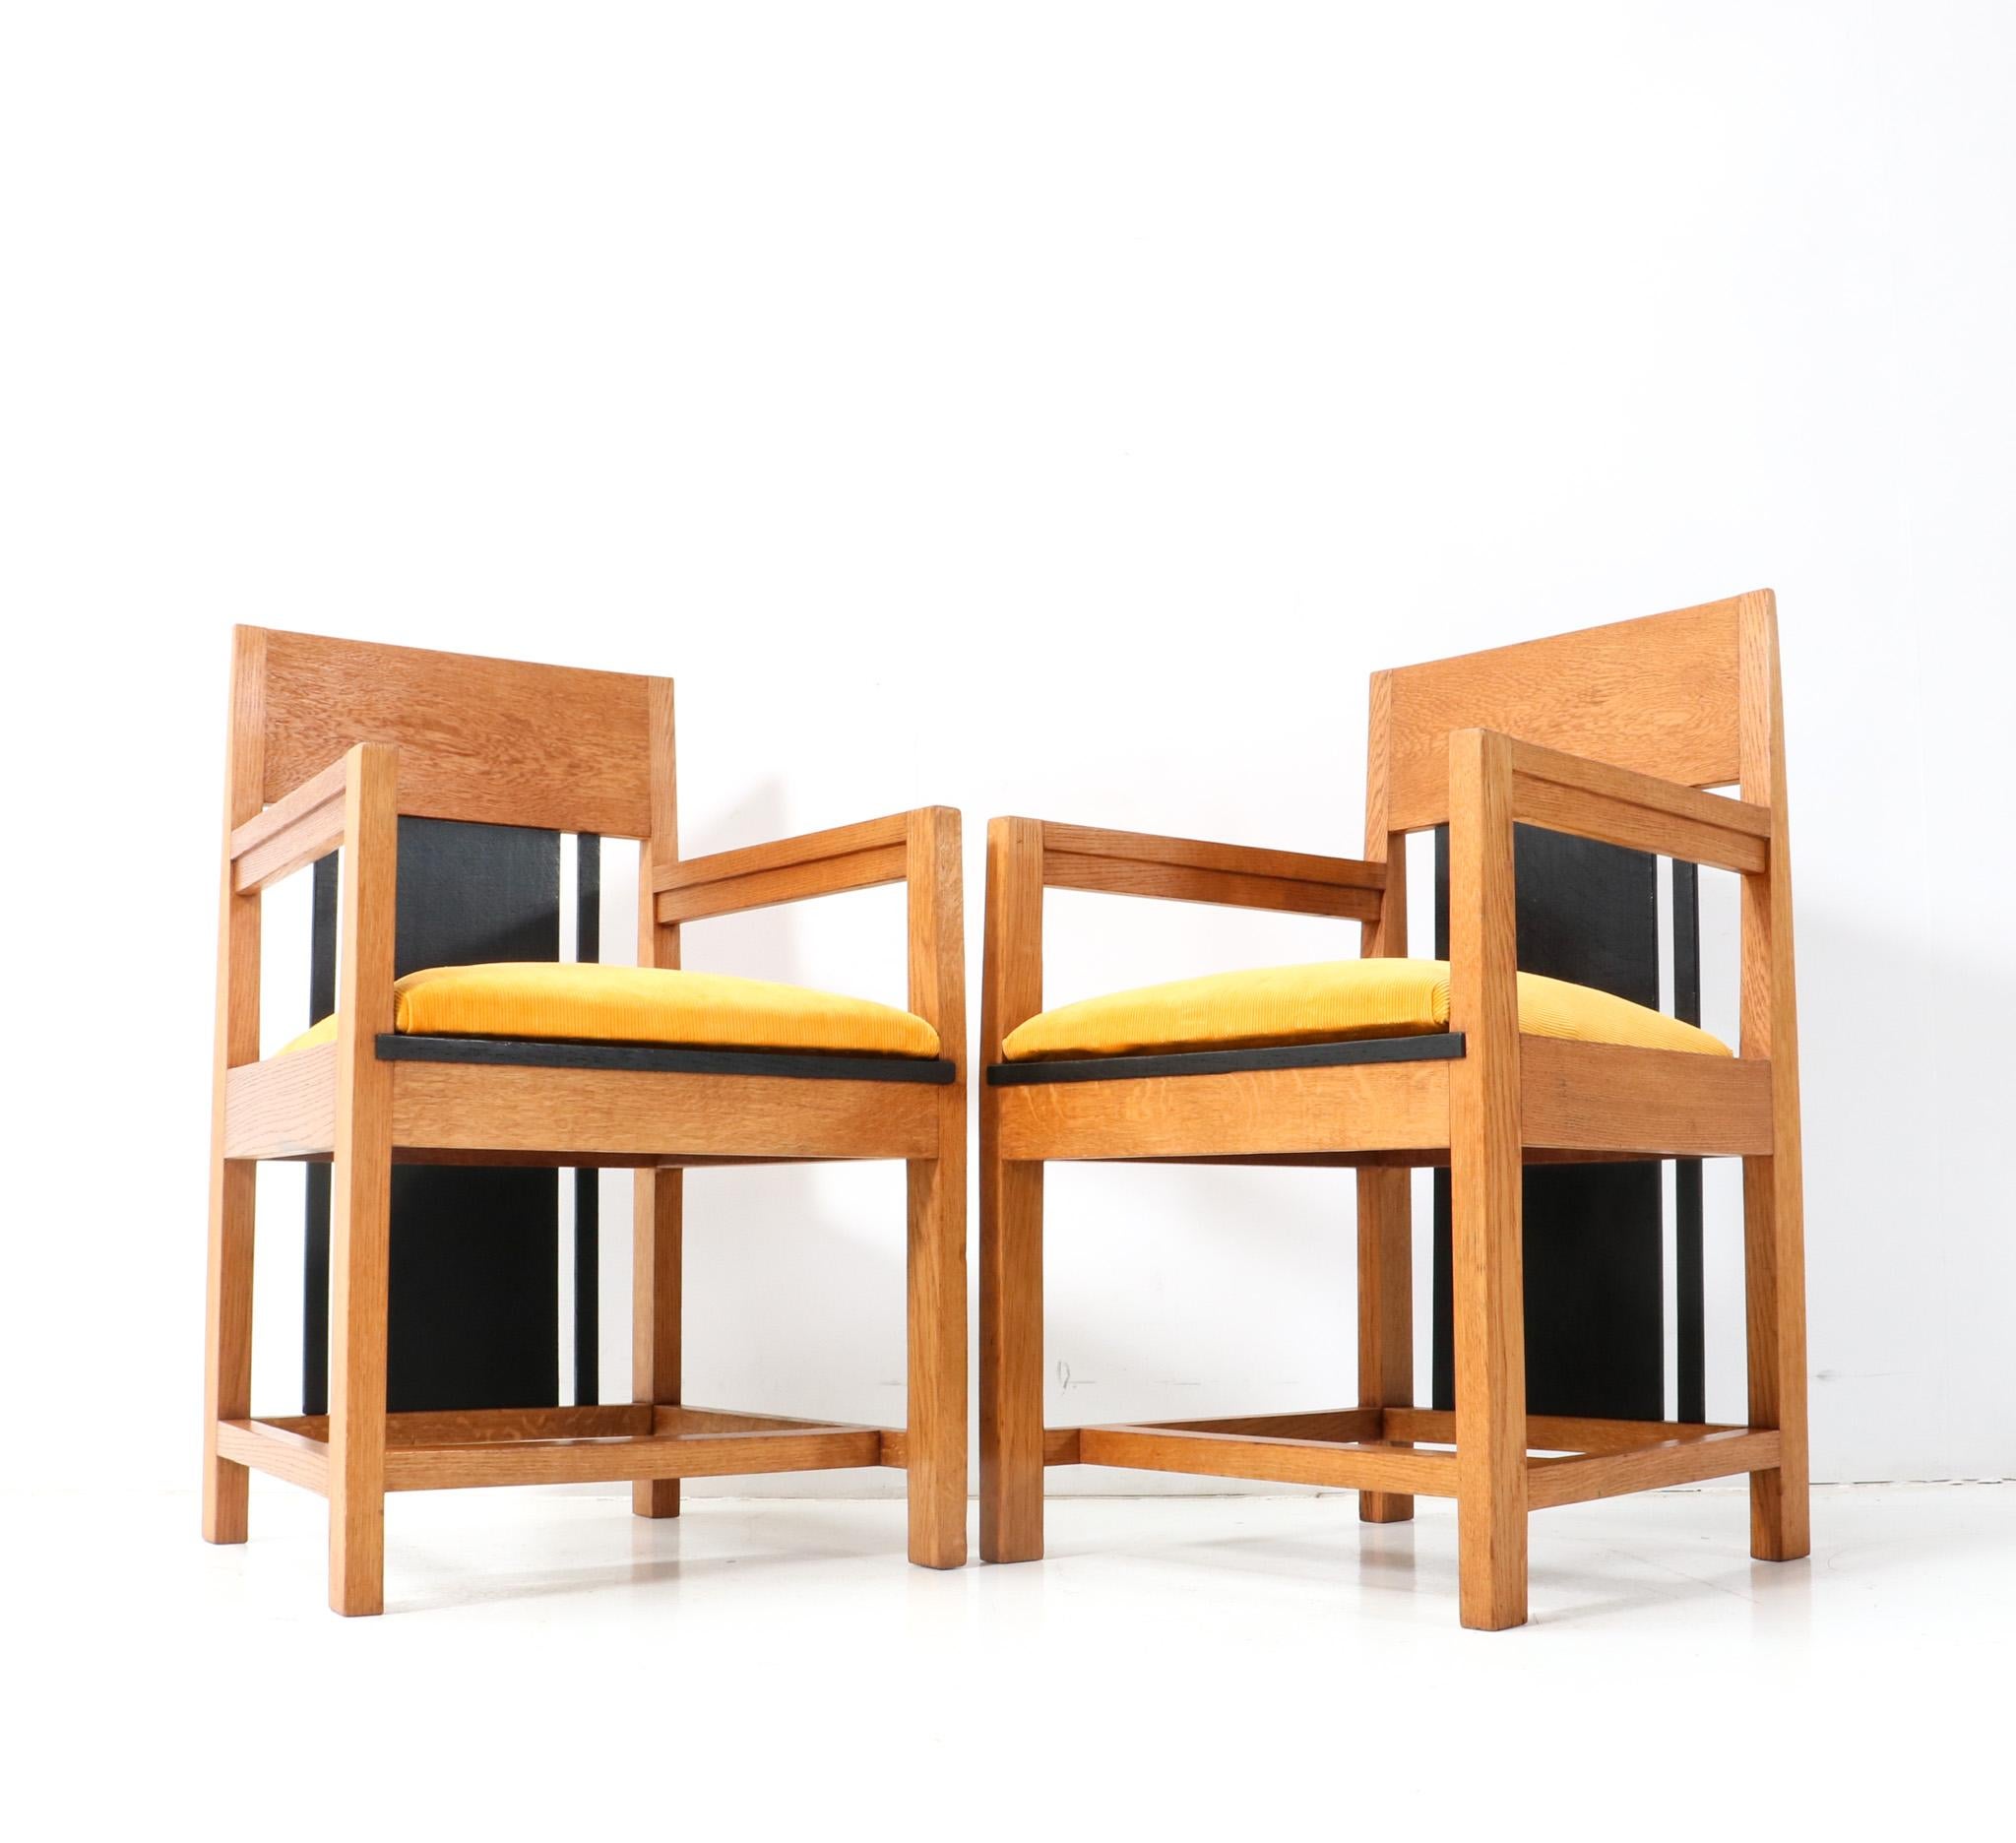 Two Oak Art Deco Modernist High Back  Armchairs by Cor Alons, 1927 In Good Condition For Sale In Amsterdam, NL